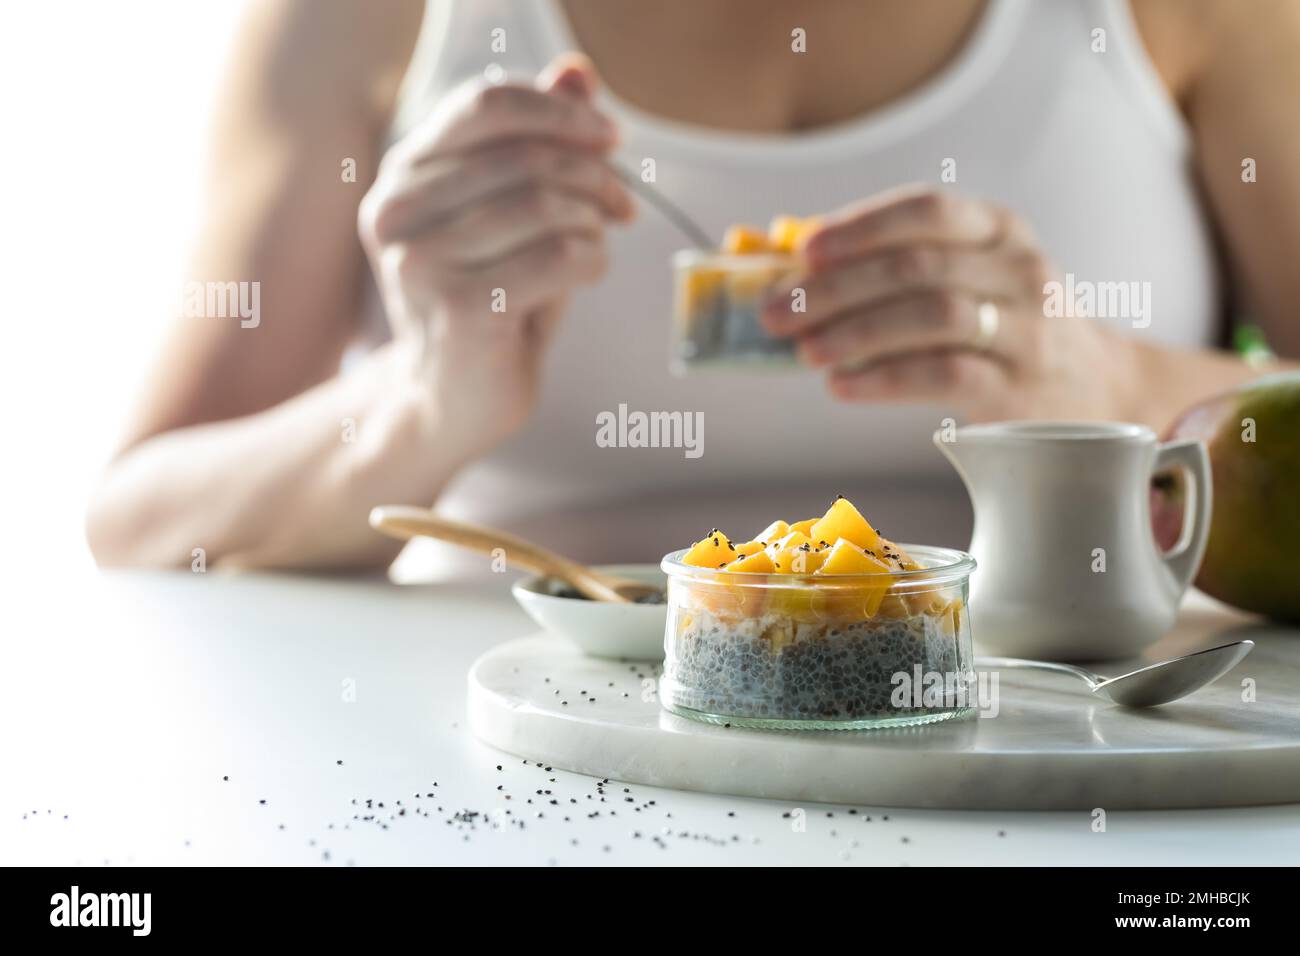 A close up view of a mango chia pudding snack with a woman eating one in behind. Stock Photo